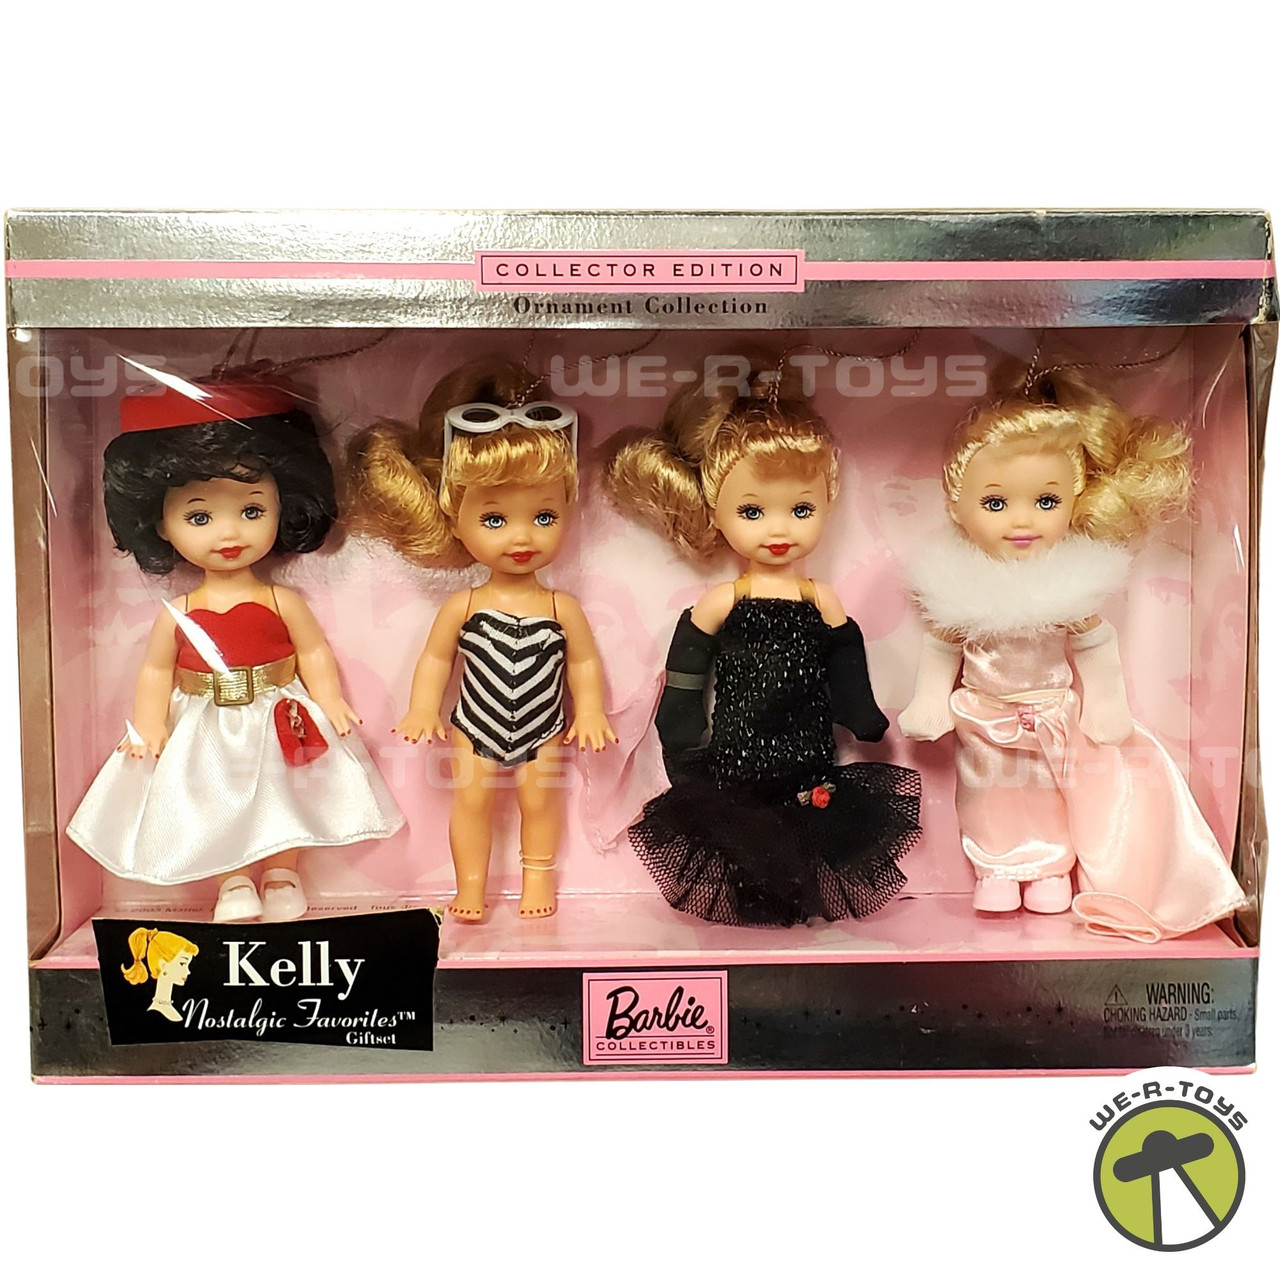 Barbie Kelly Nostalgic Favorites Doll Giftset Collector Edition 